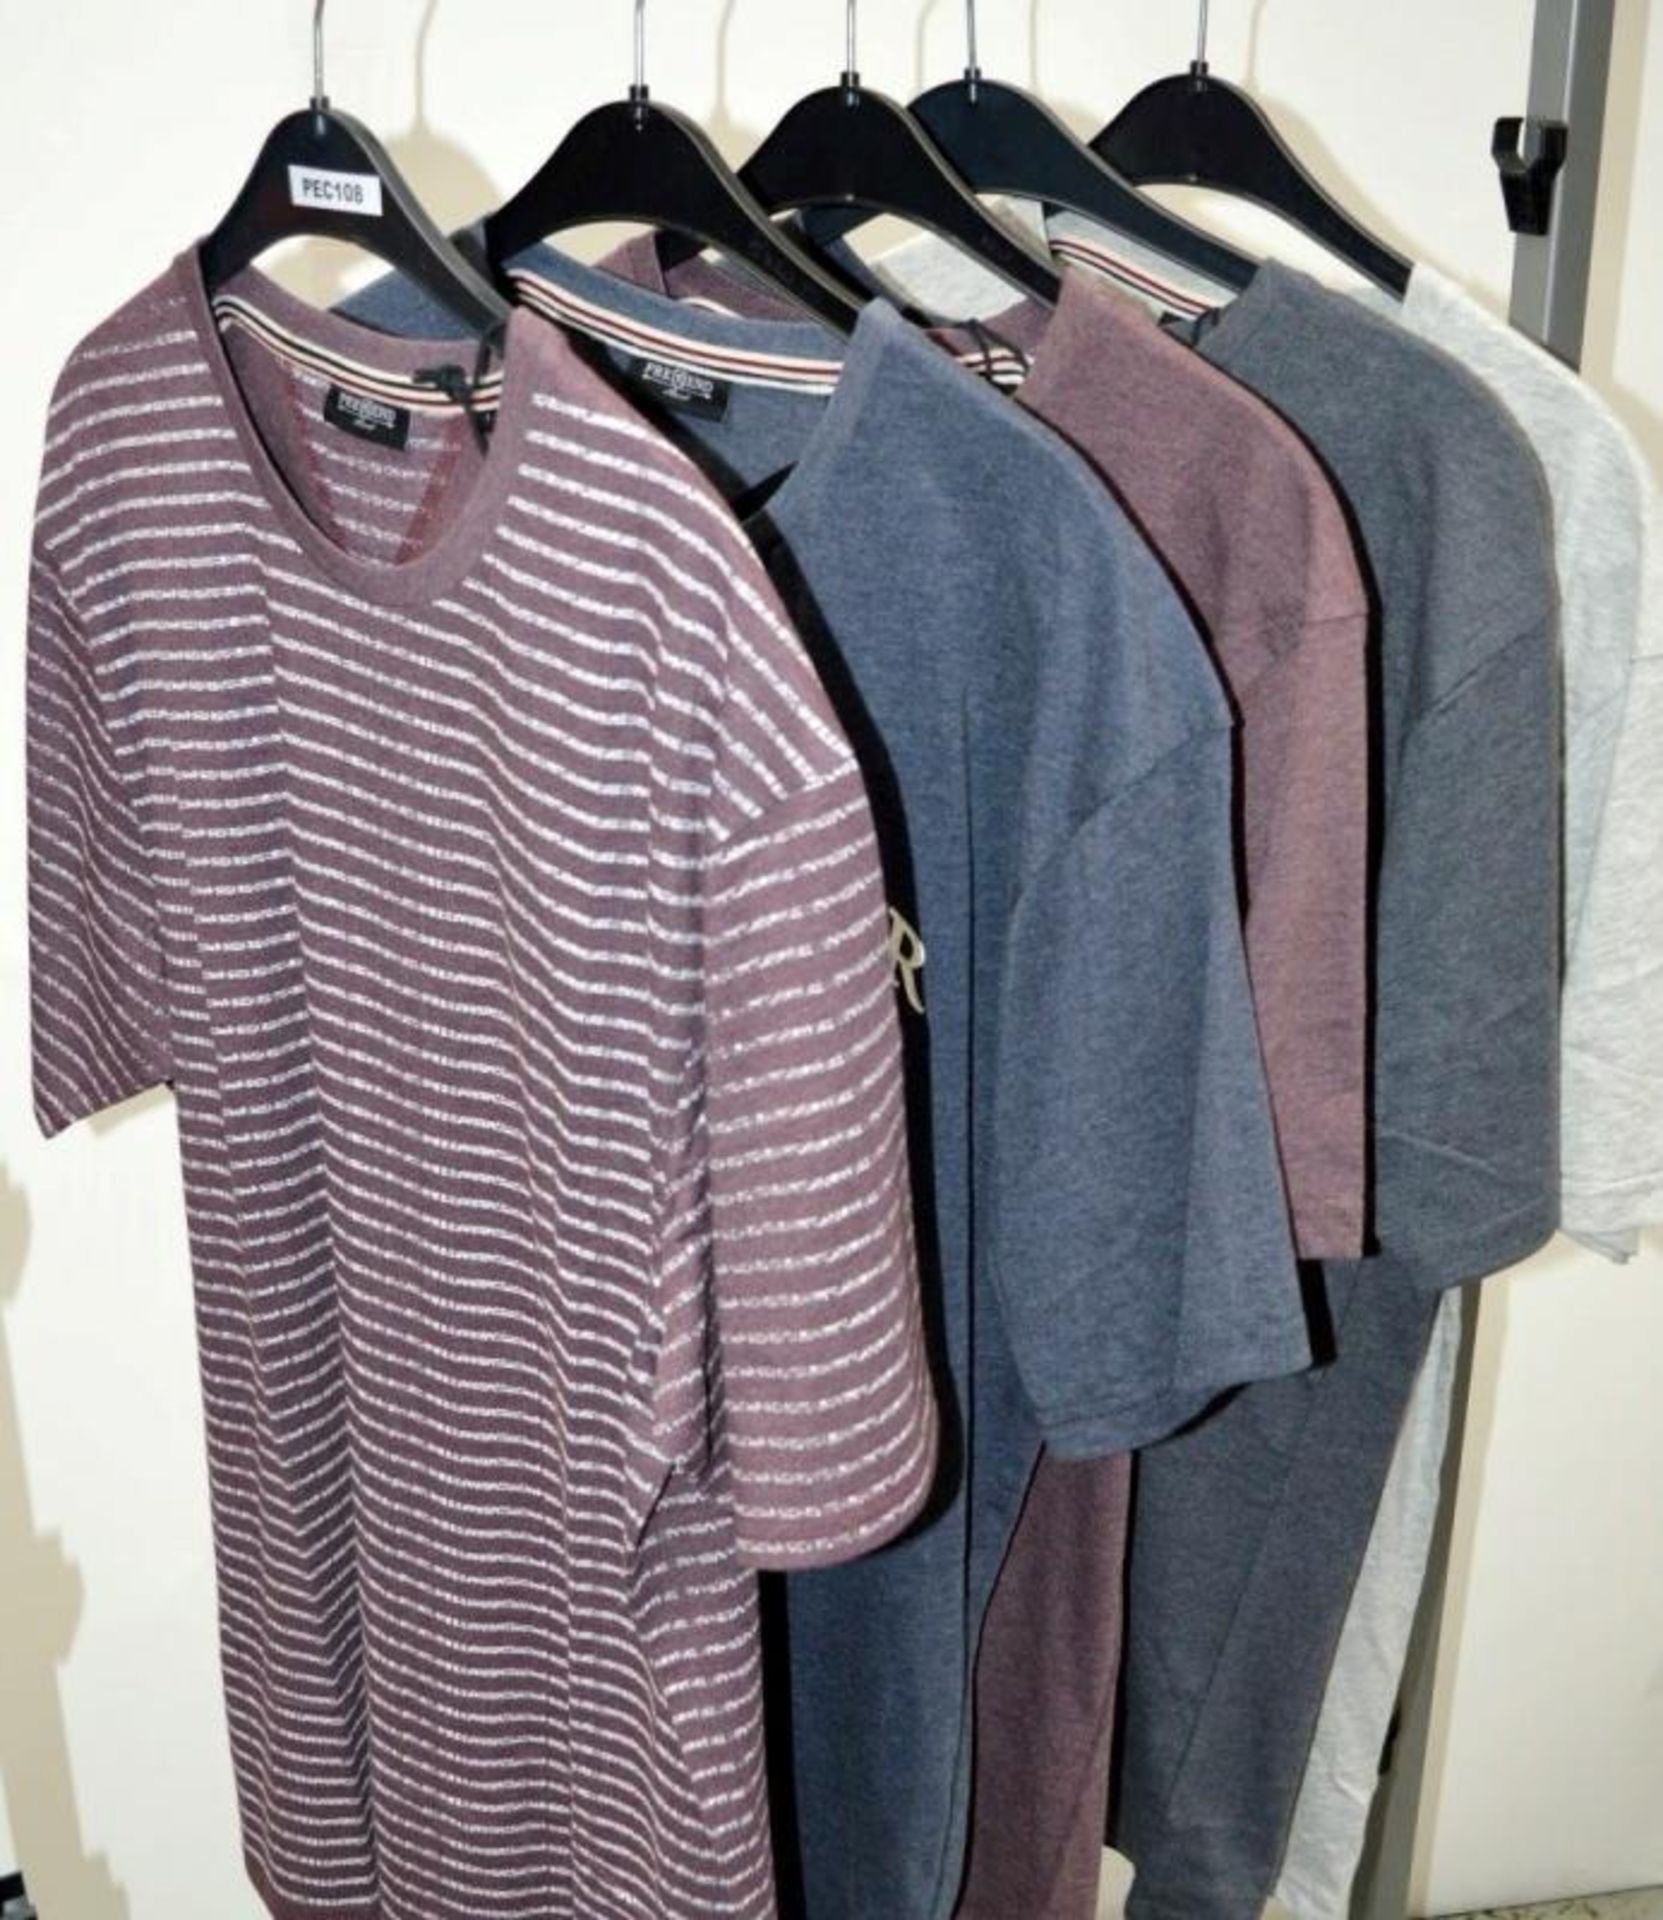 5 x Assorted PRE END / GNIOUS Branded Mens T-Shirts - New Stock With Tags - Recent Retail